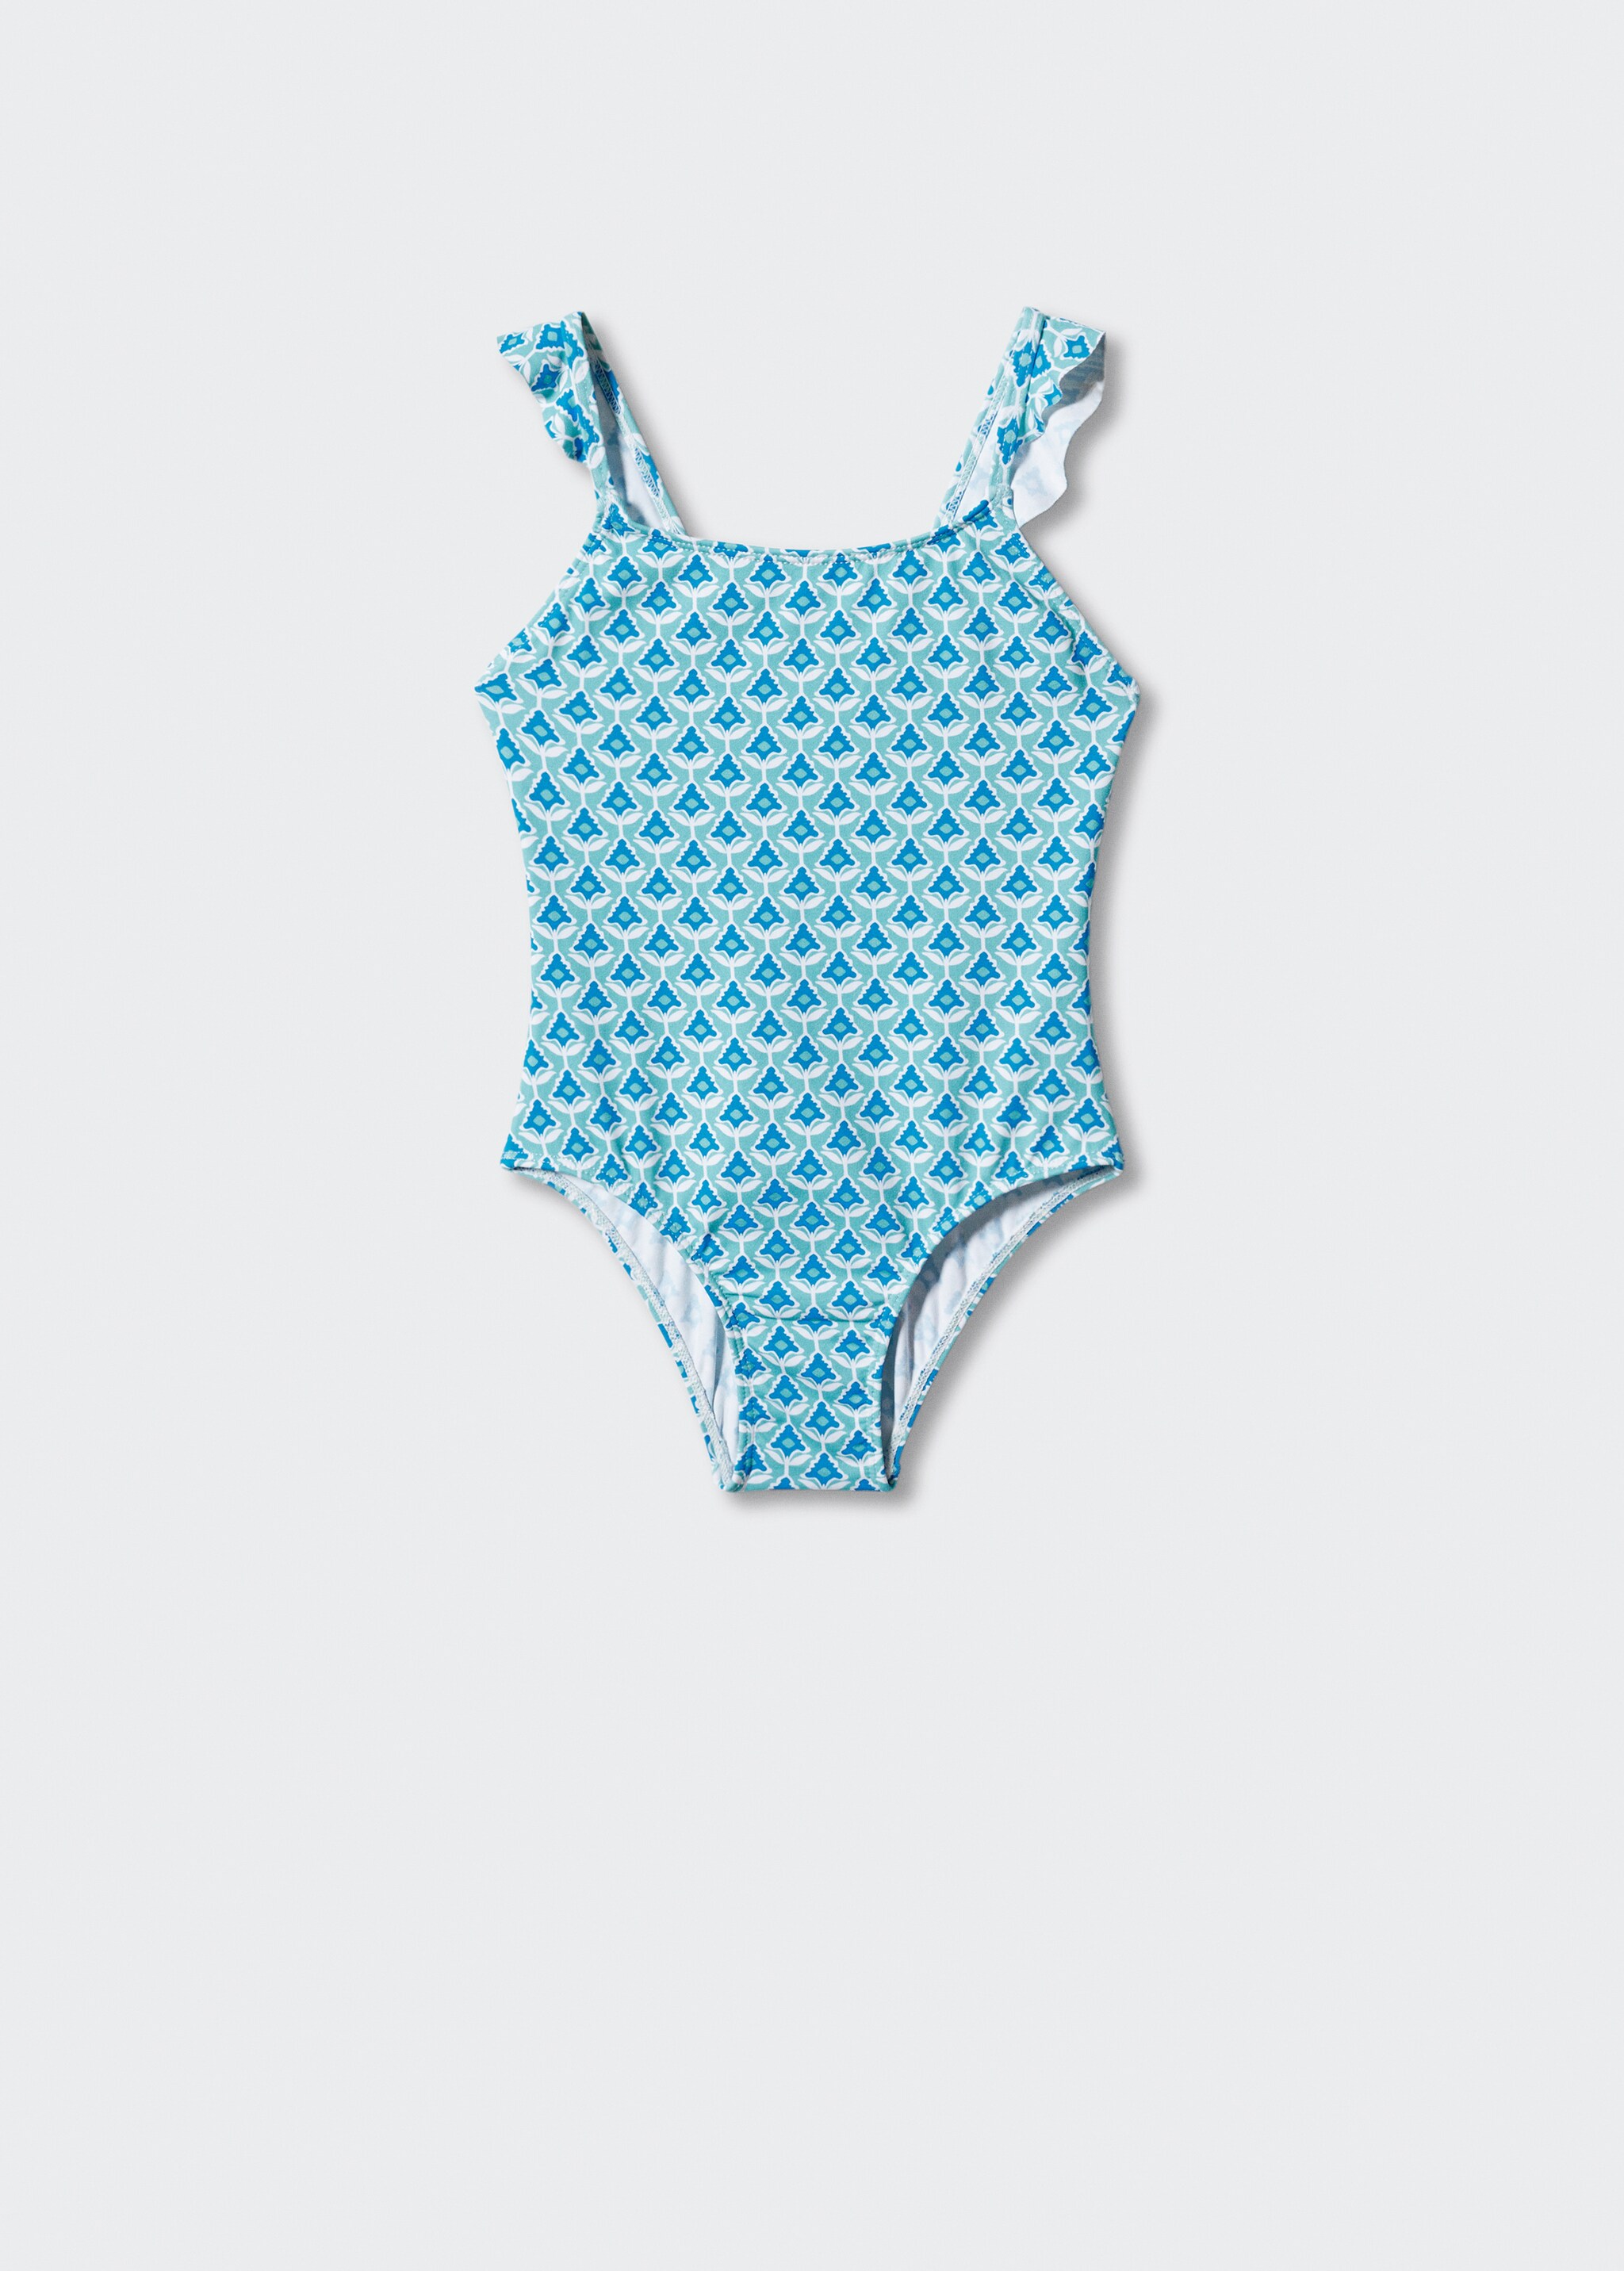 Ruffle print swimsuit - Article without model